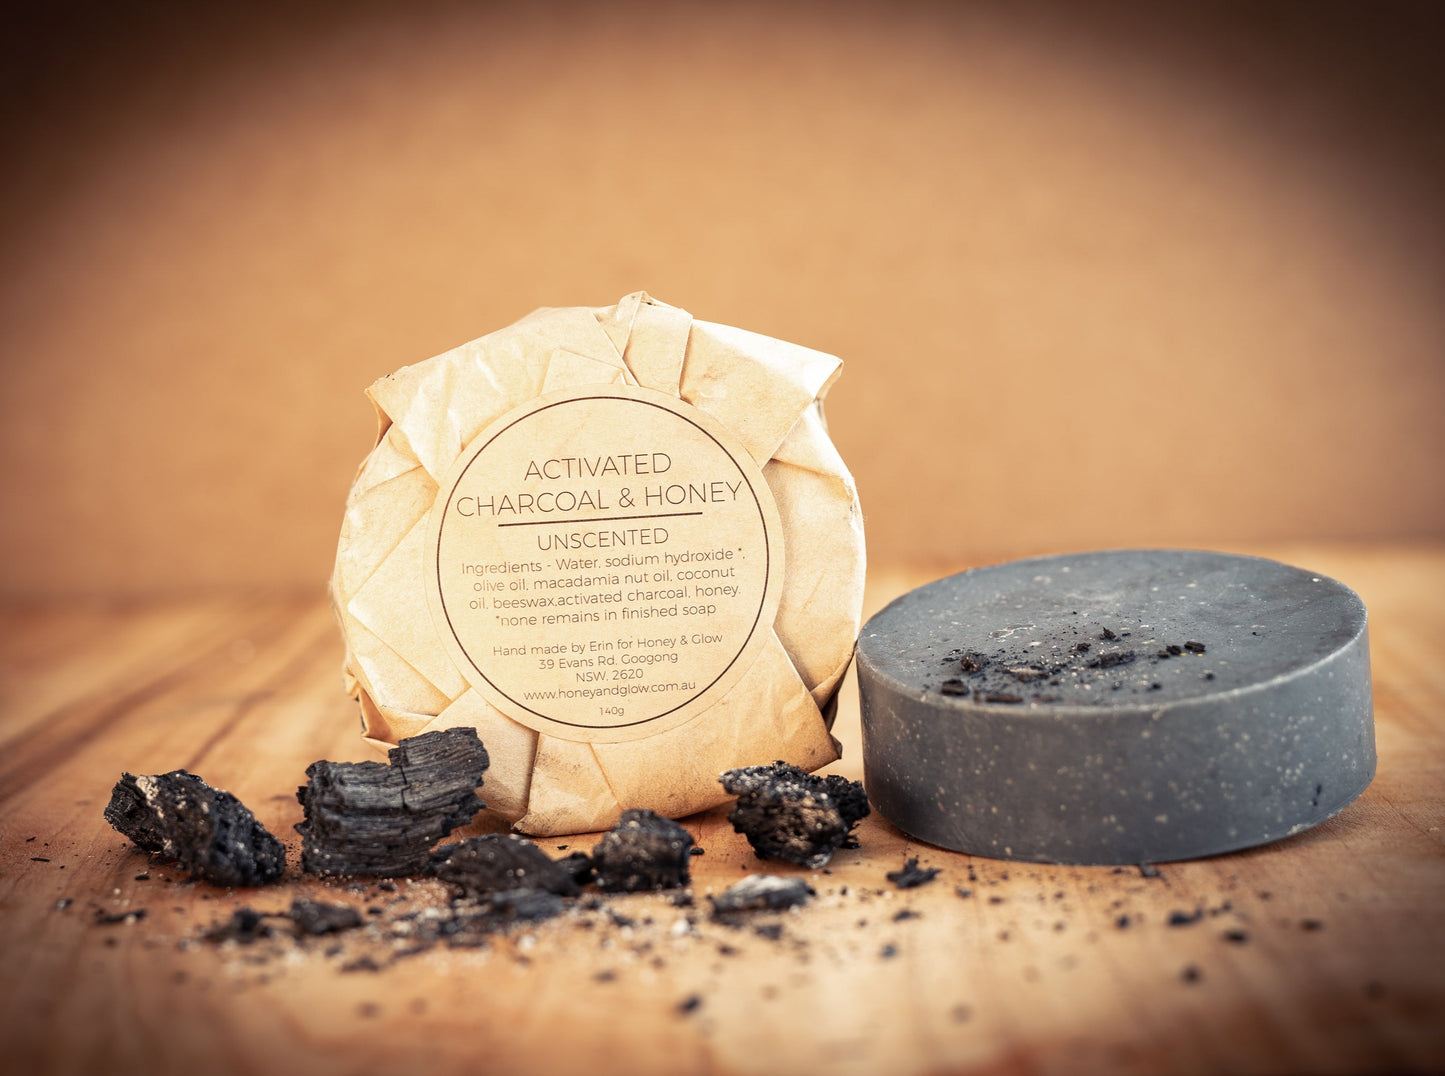 A wrapped pack of round soap is propped next to an unwrapped soap bar. The unwrapped bar is round and black. There are pieces of charcoal around. The label on the pack says Activated Charcoal and Honey, unscented, by Honey and Glow.